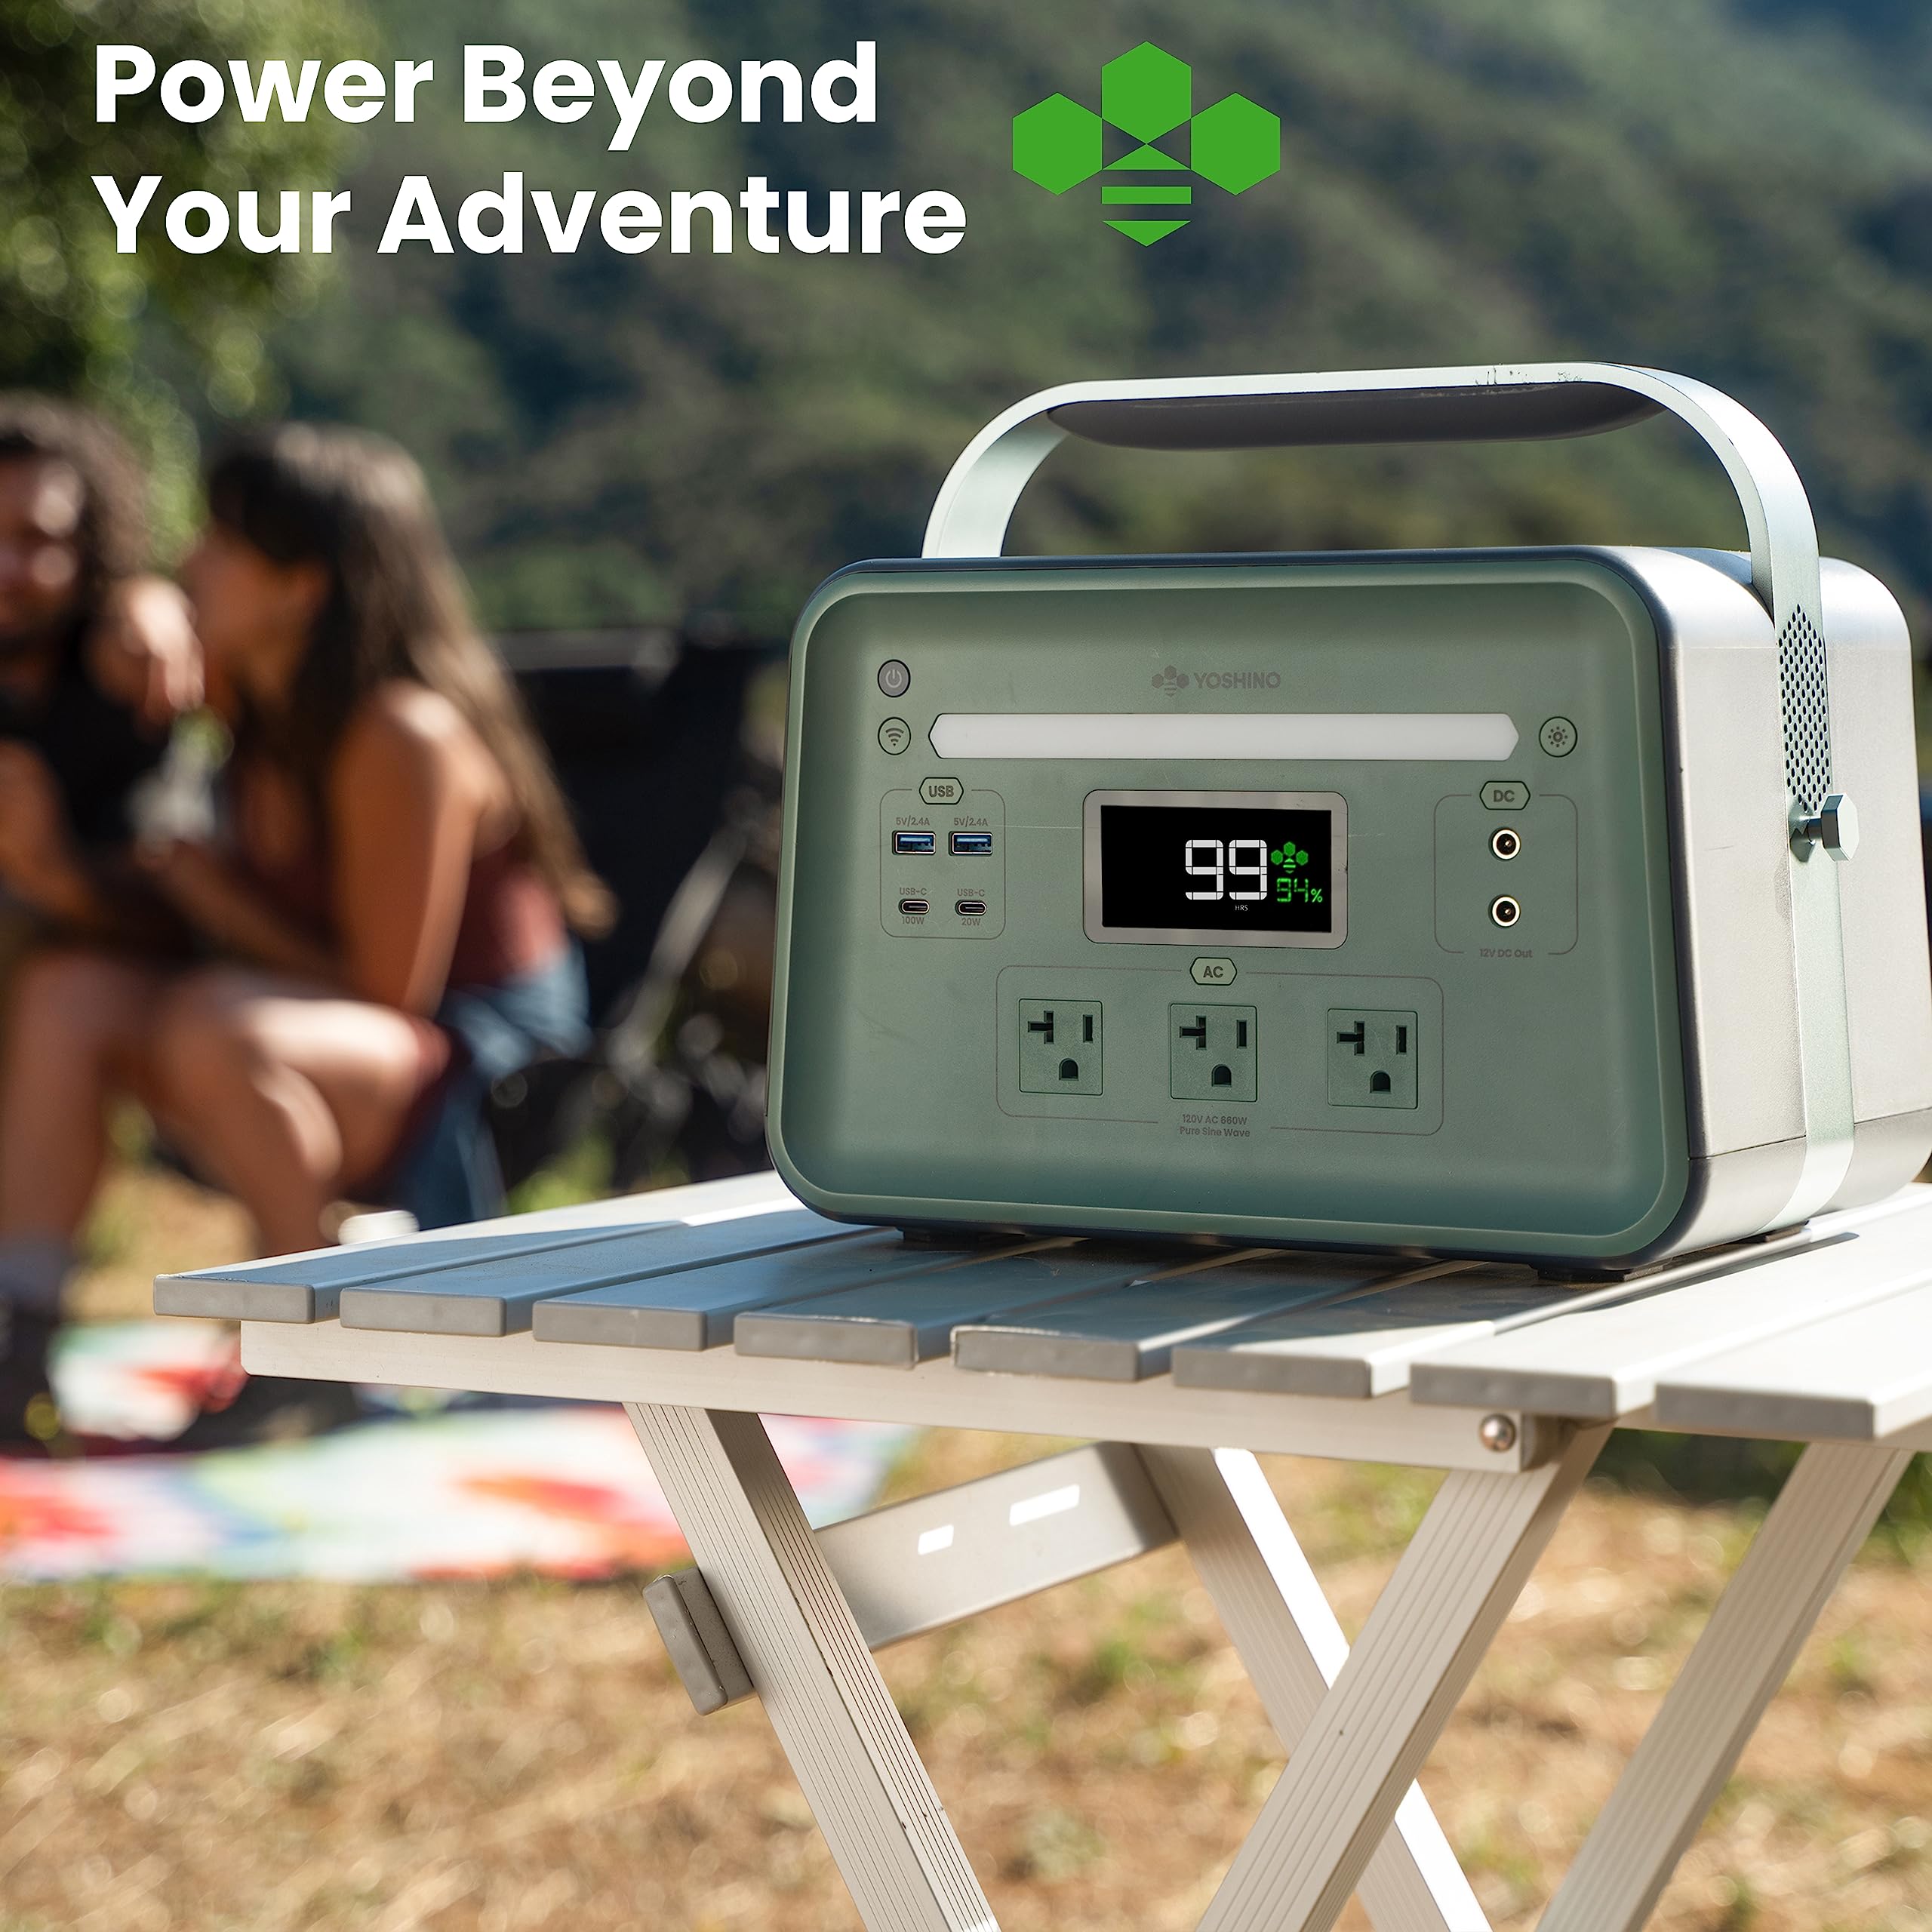 Yoshino B660 SST True Solid-State Portable Power Station 602Wh, Solar Optional Generator, Recharges from 0 to 80% in 4 hours for Emergency, Travel, Outdoor Camping, Vans/RV